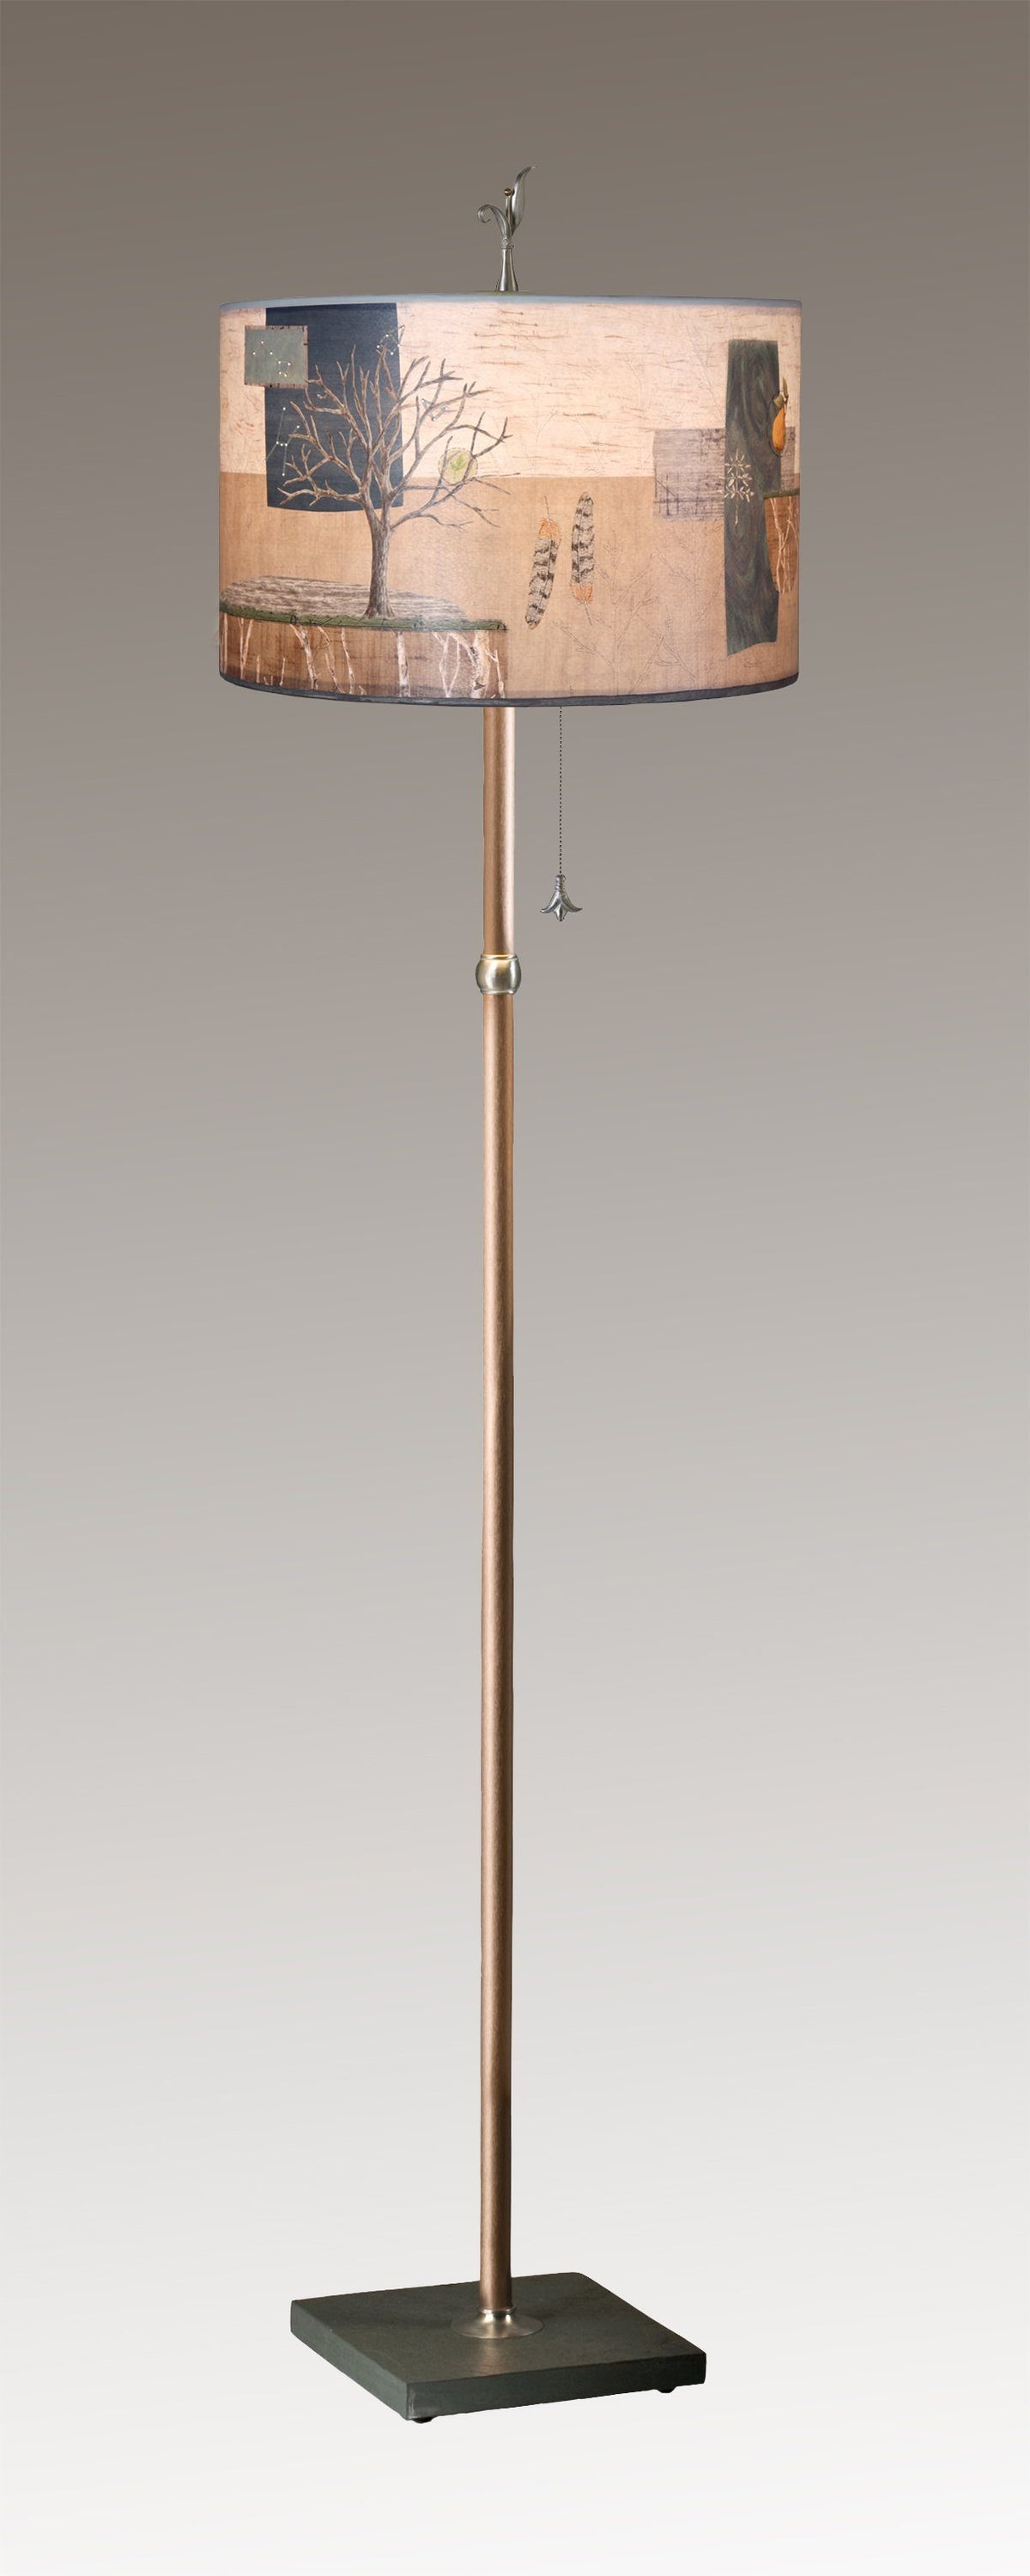 Copper Floor Lamp with Large Drum Shade in Wander in Drift